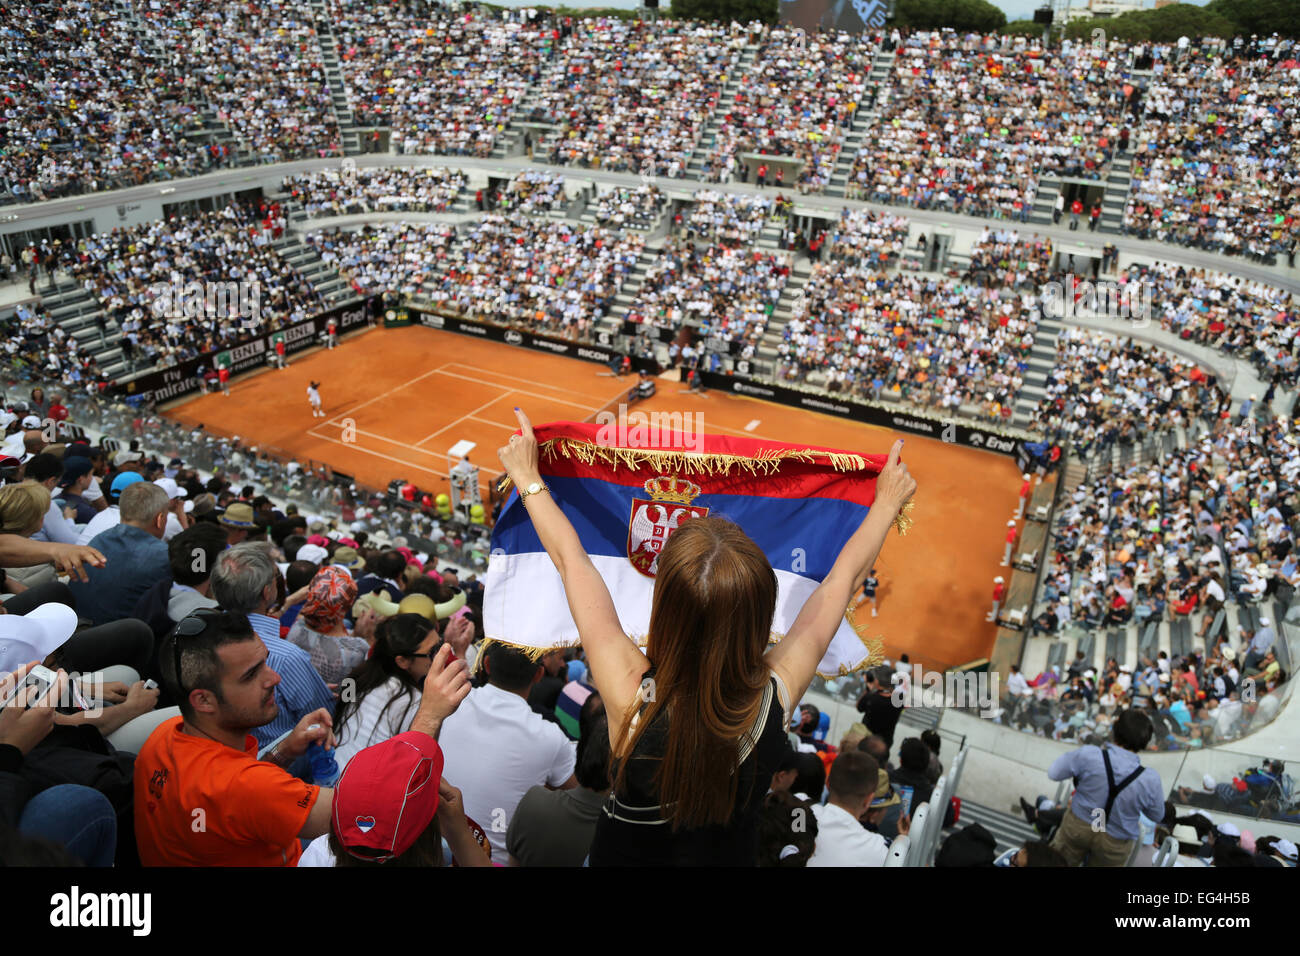 spænding Tochi træ sammen ITALY, Rome : A general view shows the central court during the ATP Rome's  Tennis Masters final between Spain's Rafael Nadal (R Stock Photo - Alamy